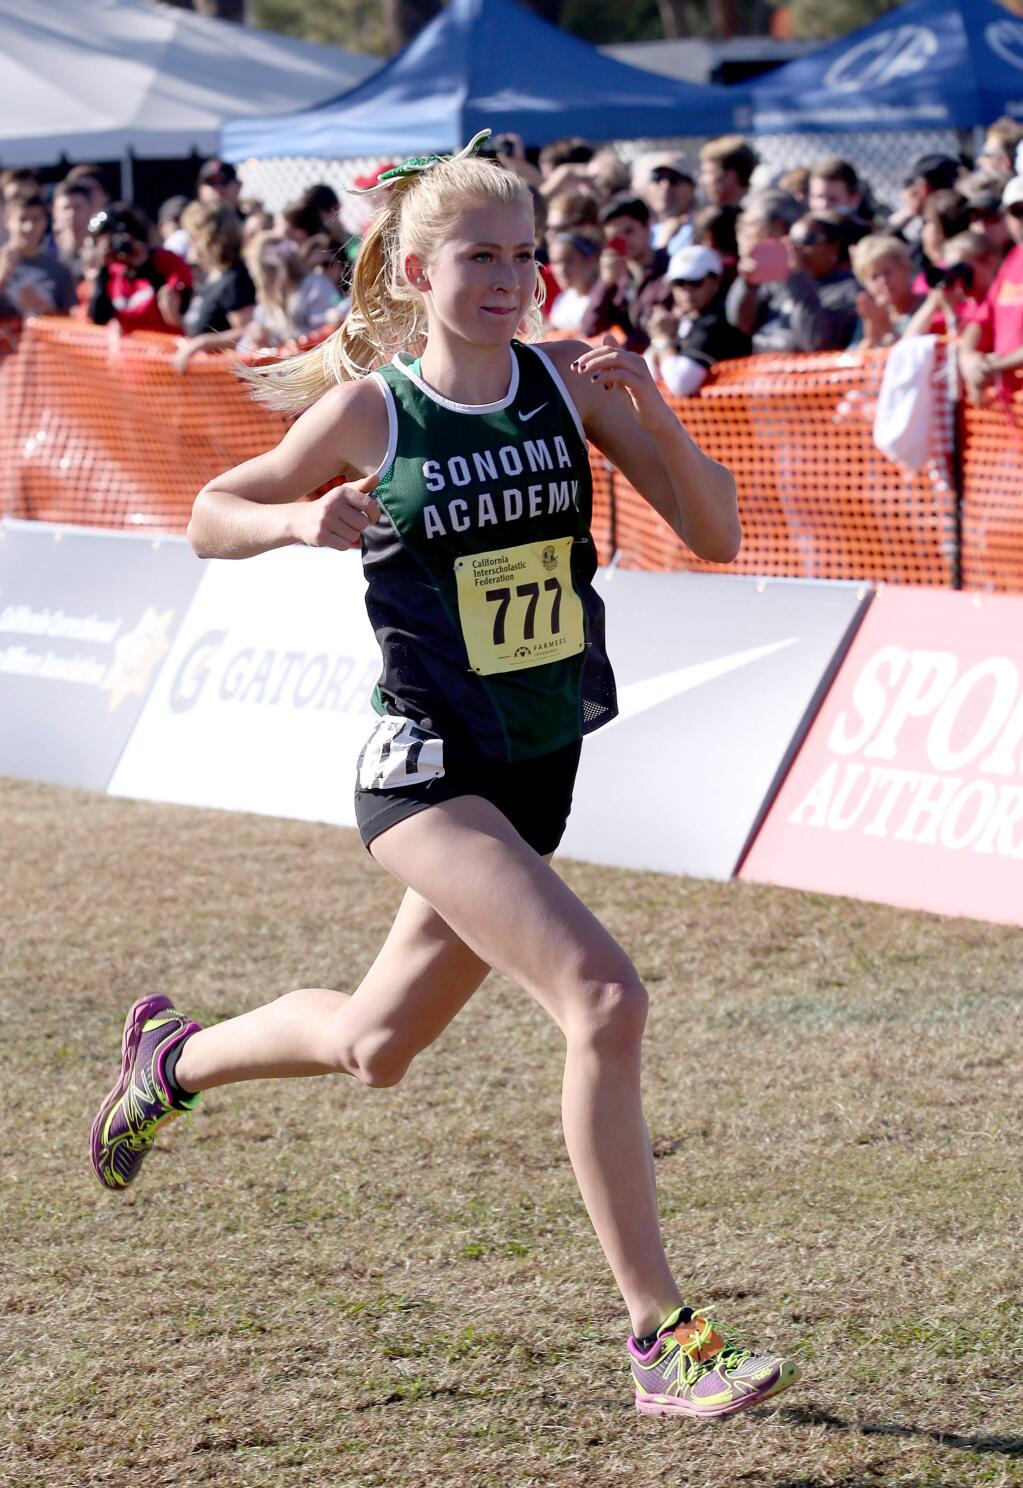 Sonoma Academy's Rylee Bowen, ran to the finish line in first place in Division 5 with a time of 18:36 during the 2014 CIF State Cross Country Championships held at Woodward Park in Fresno, Saturday, November 29, 2014. (Crista Jeremiason/The Press Democrat)